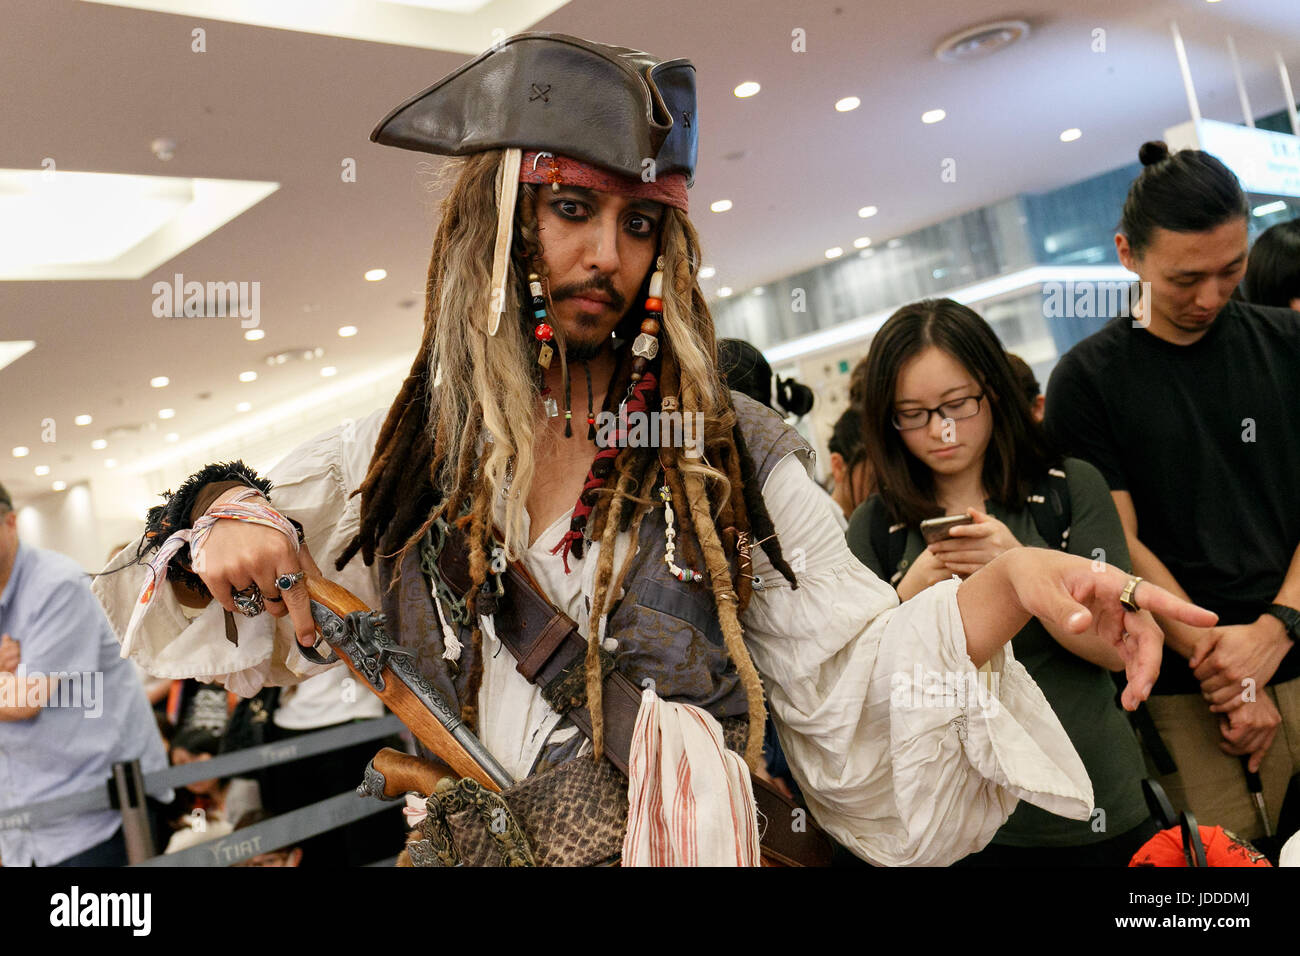 A fan dressed as Captain Jack Sparrow poses for a photograph while waits to greet American actor Johnny Depp at Tokyo International Airport on June 20, 2017, Tokyo, Japan. Hundreds of Japanese fans where waiting at the airport to greet Depp who was happy to shake hands with many of them. Depp came to promote his movie ''Pirates of the Caribbean: Dead Men Tell No Tales'' which will be released in Japan on July 1st. Credit: Rodrigo Reyes Marin/AFLO/Alamy Live News Stock Photo